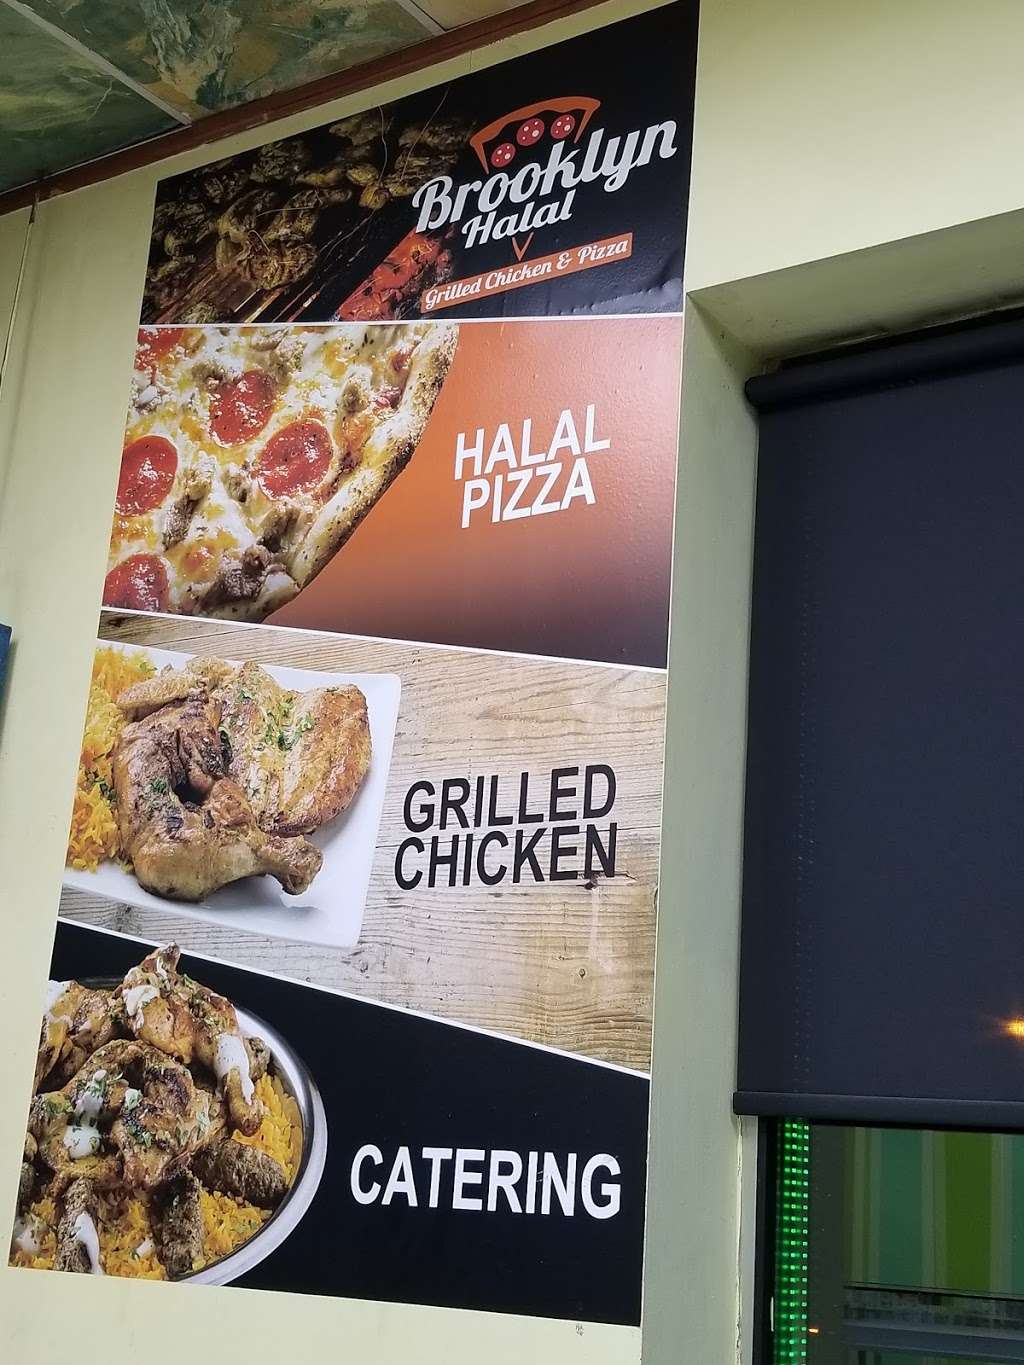 Brooklyn Halal Grilled Chicken & Pizza | 10607 S Harlem Ave, Worth, IL 60482 | Phone: (708) 923-1111